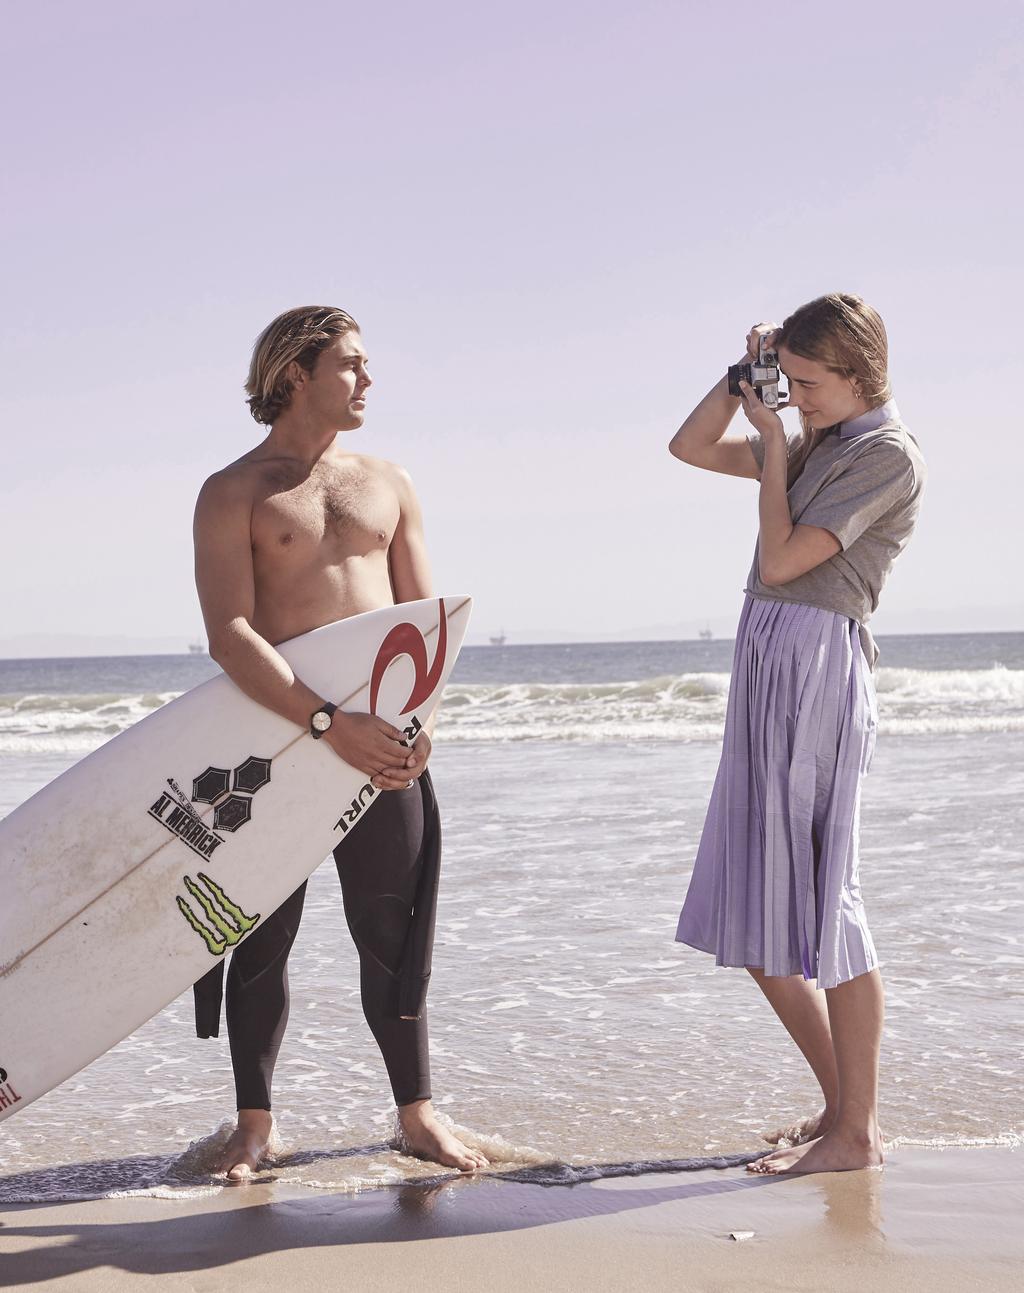 Fresh faces of the new generation, pro surfer Conner Coffin with model Grace Johnson.